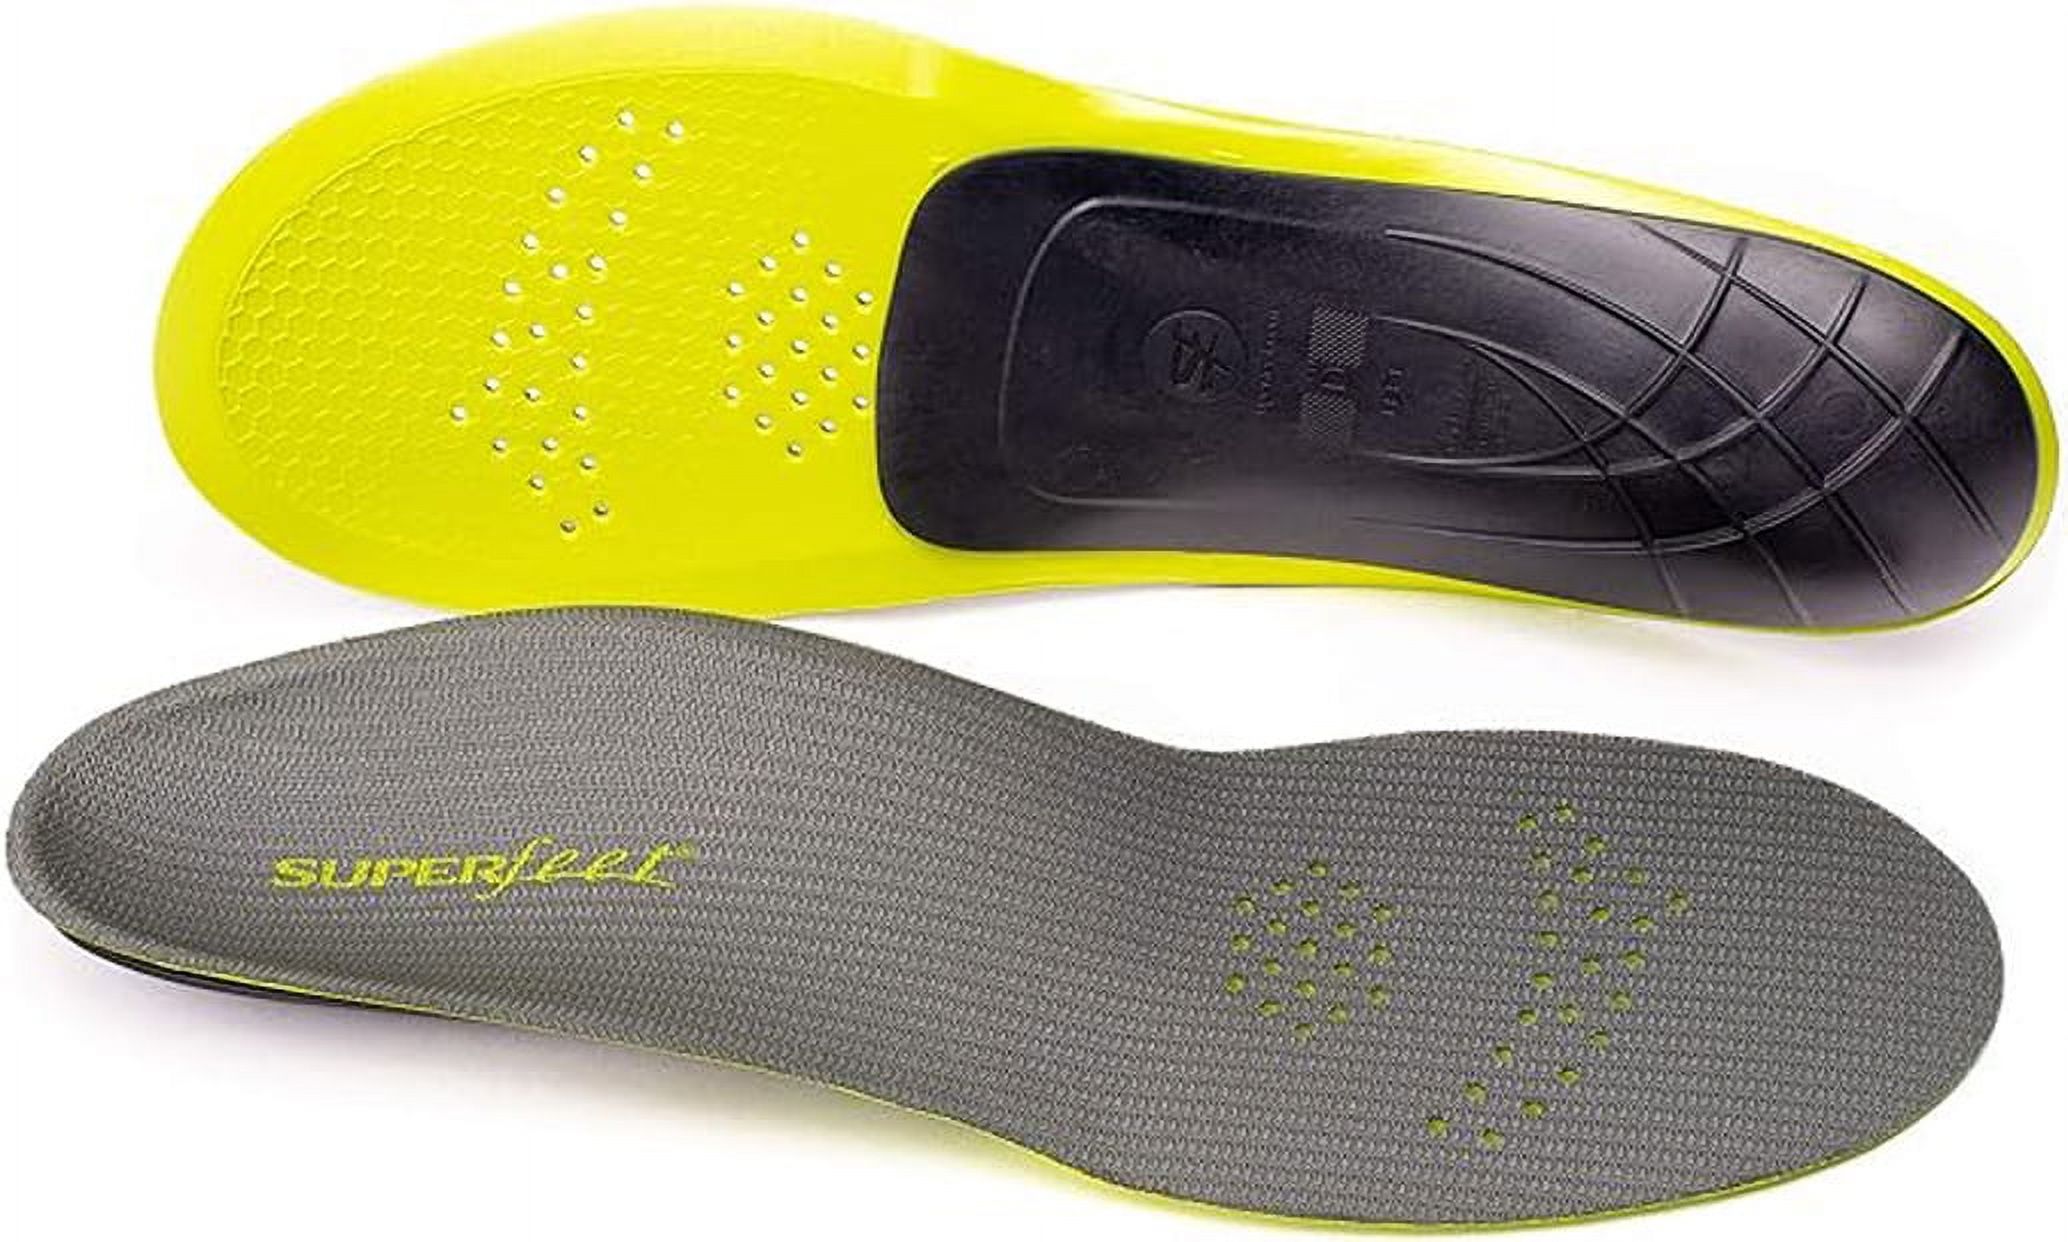 Superfeet Carbon Insole - image 1 of 6